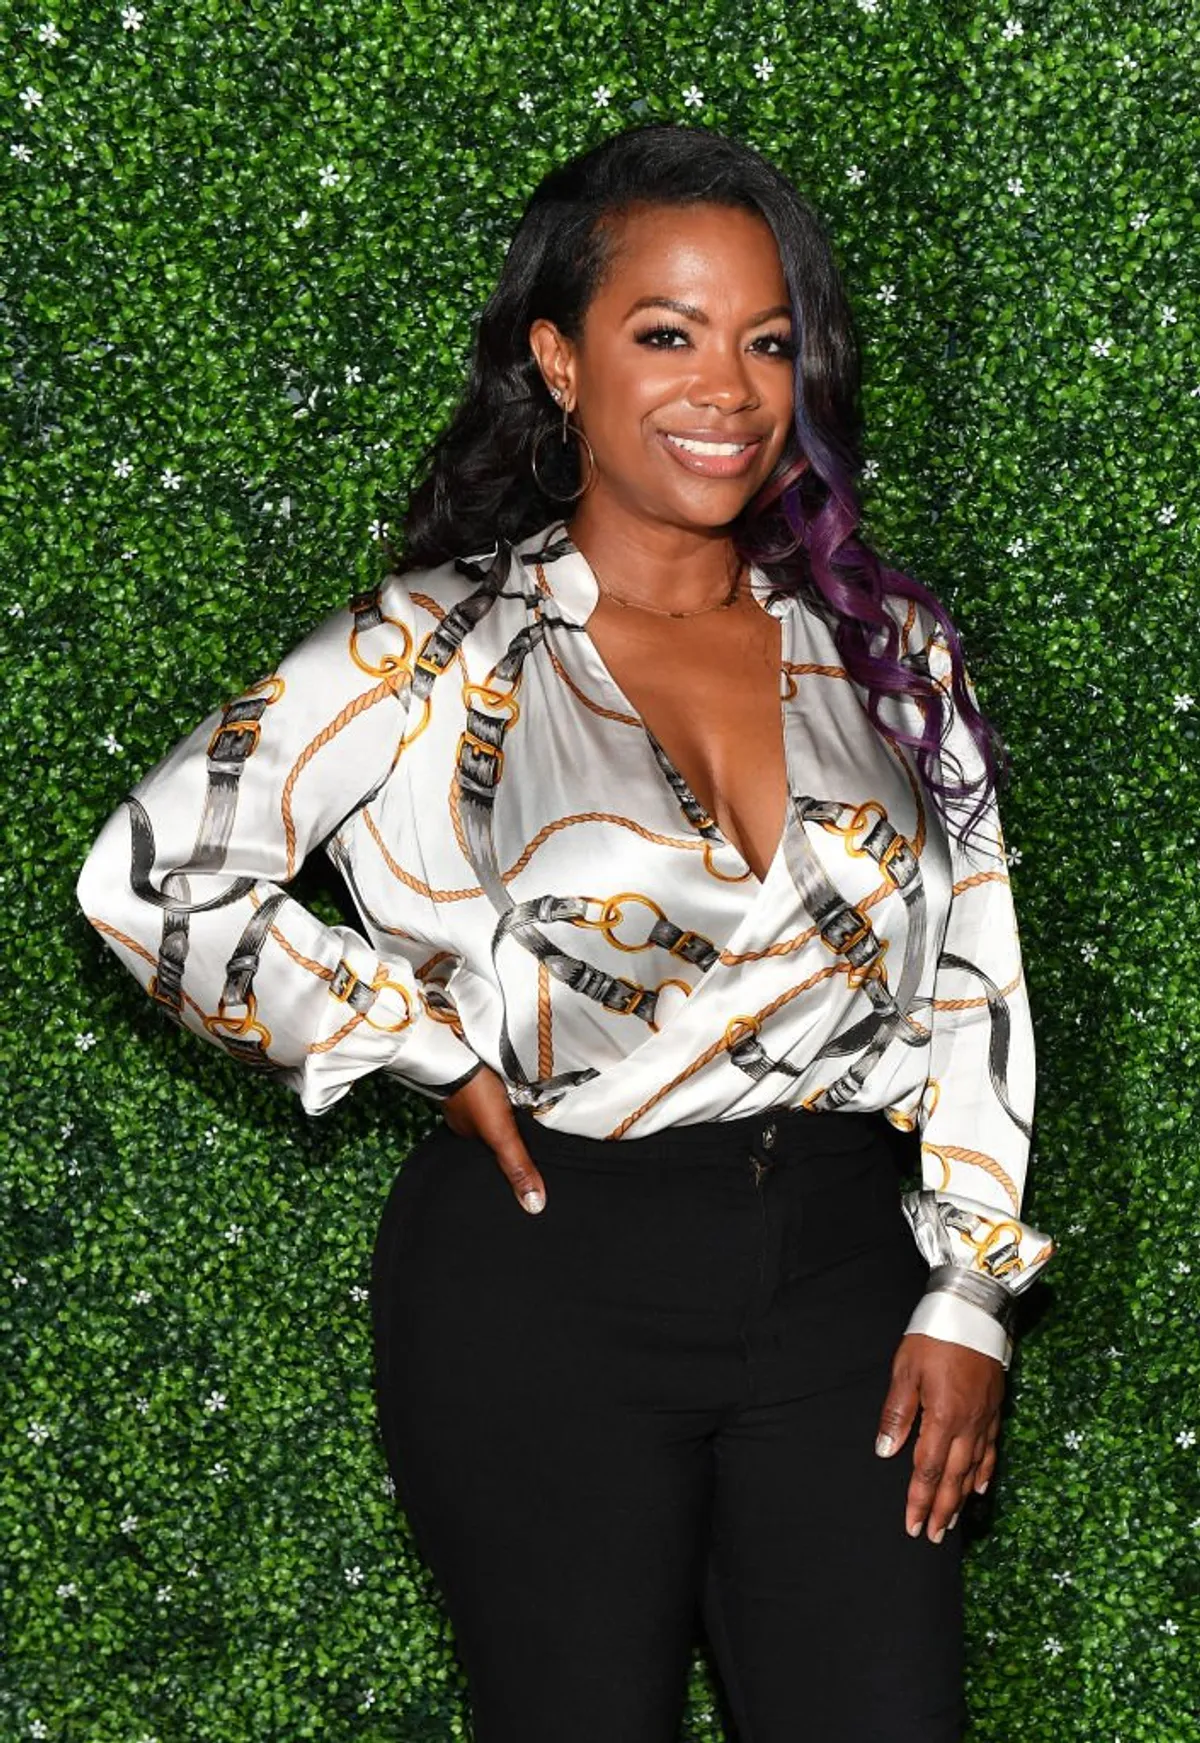 Kandi Burruss attends the Reelz on Wheels benefit event in Atlanta, Georgia in August 2020. | Photo: Getty Images